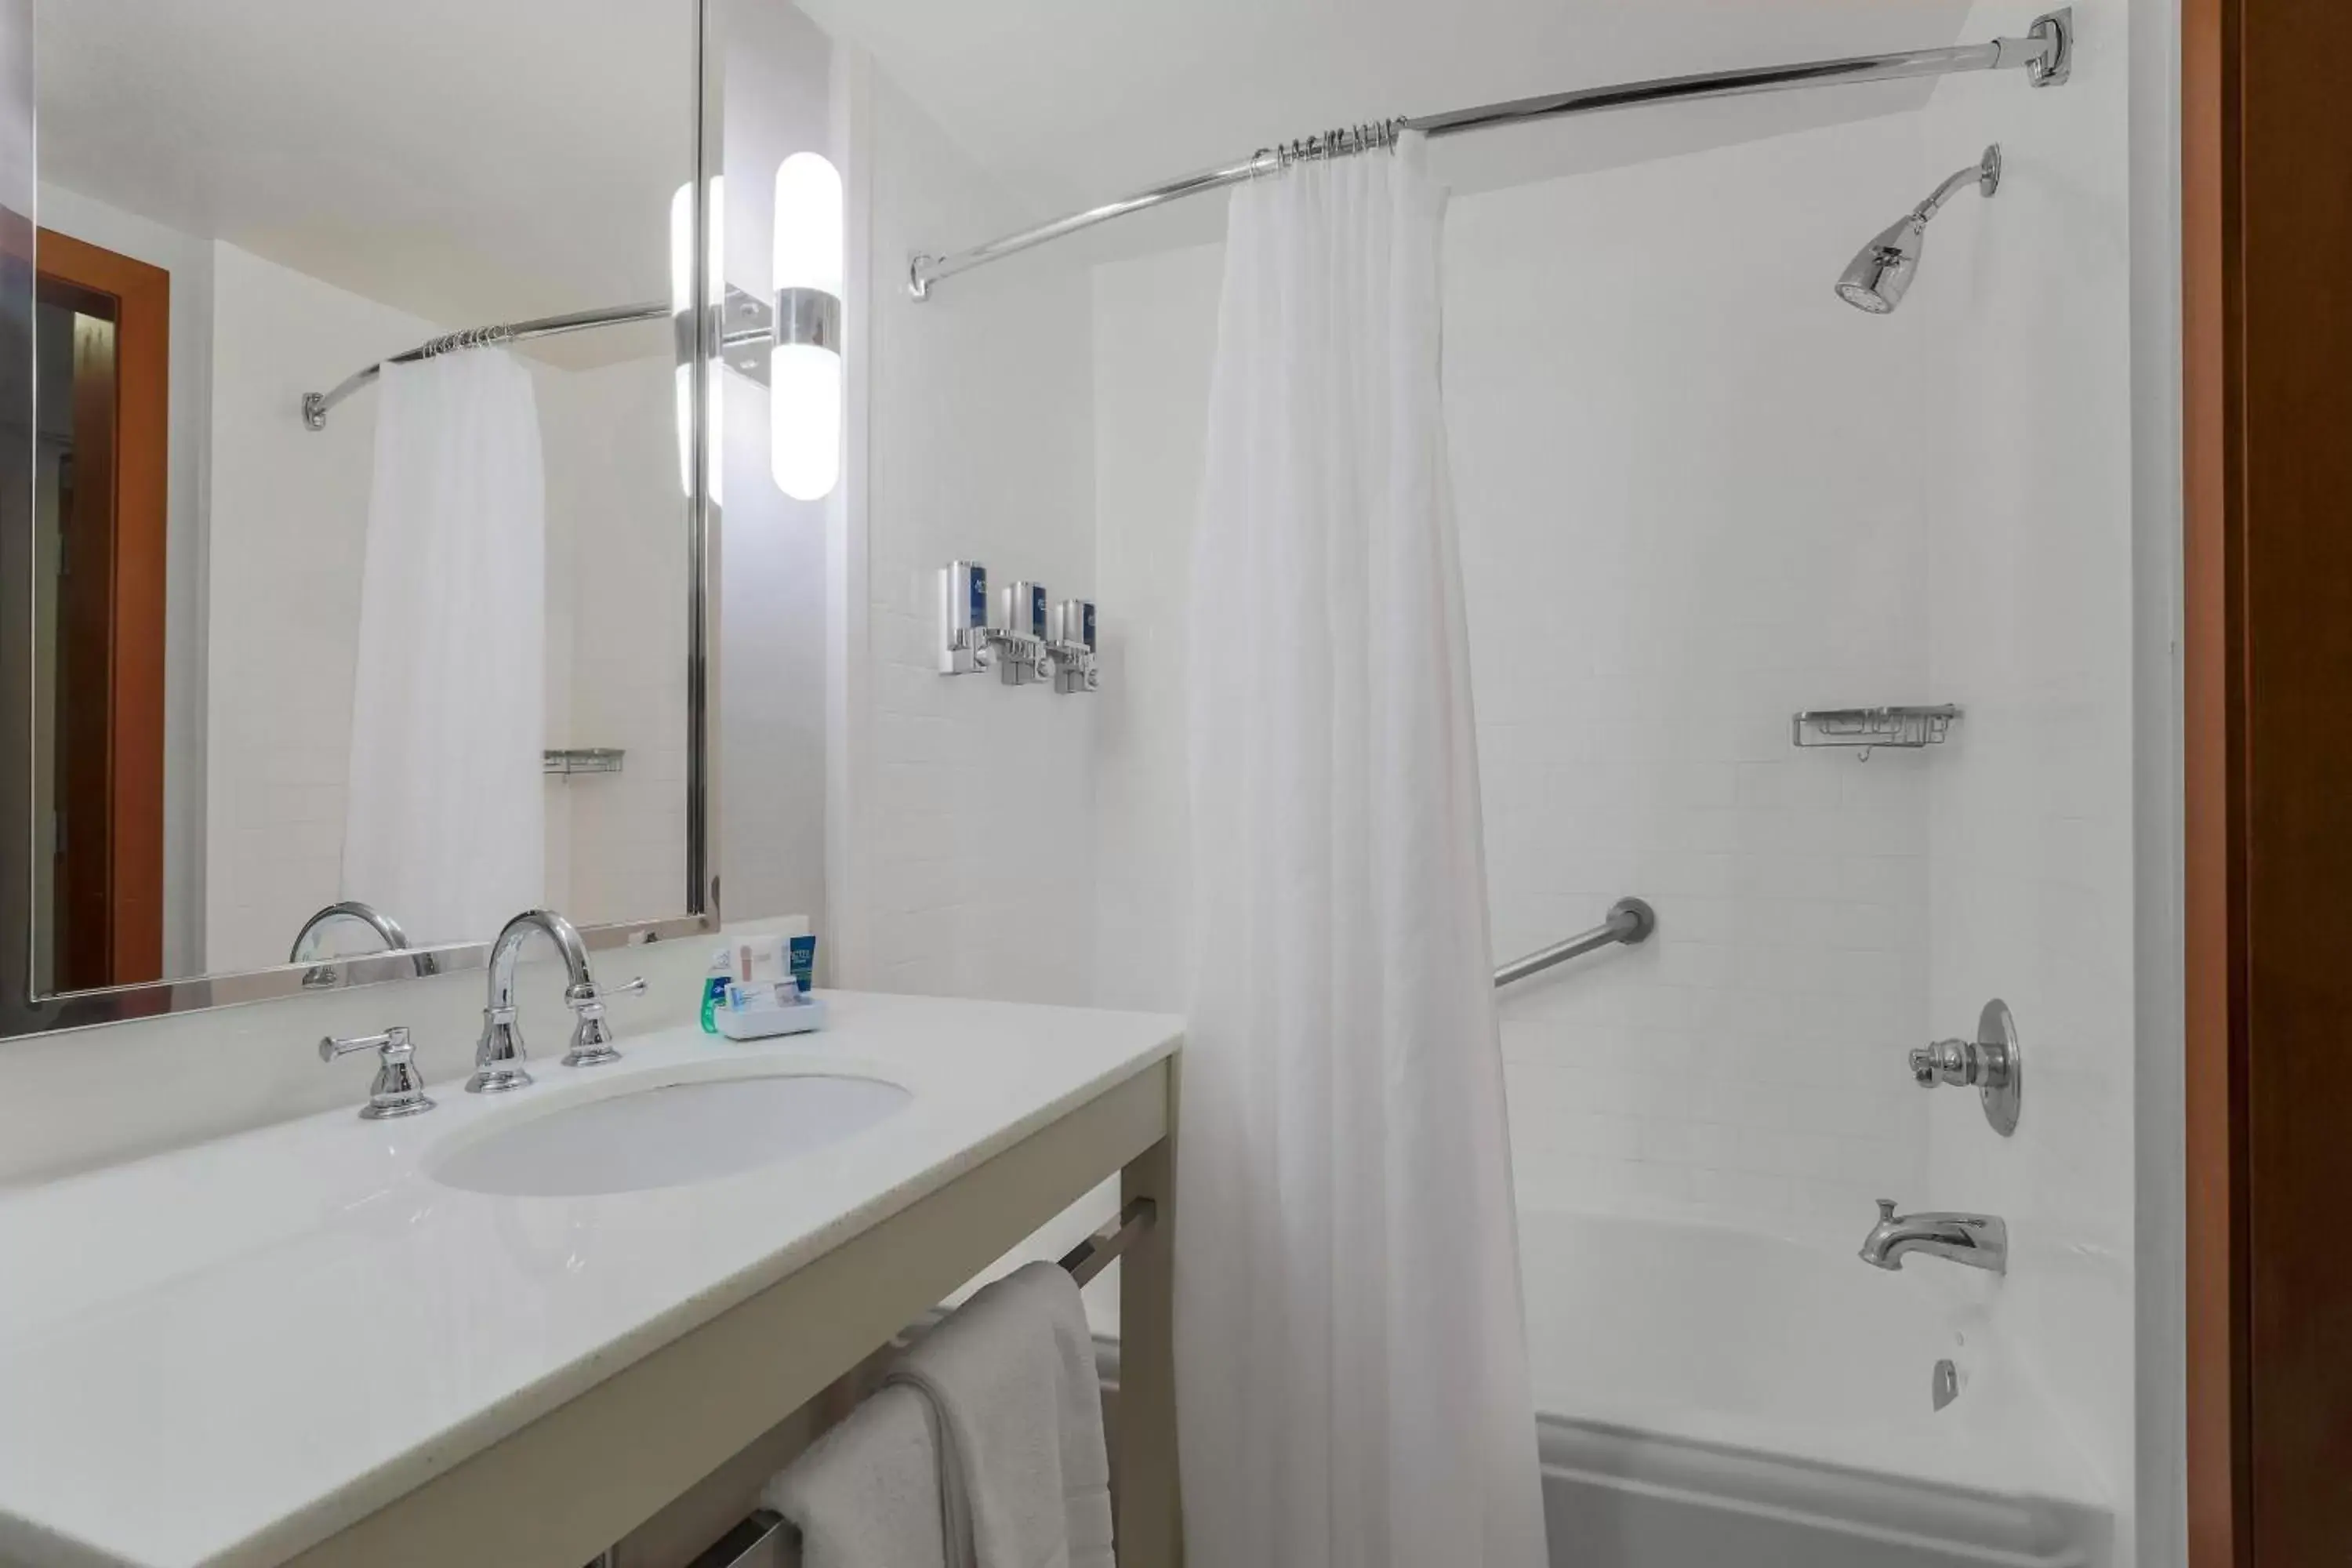 Bathroom in Four Points by Sheraton, Ontario-Rancho Cucamonga